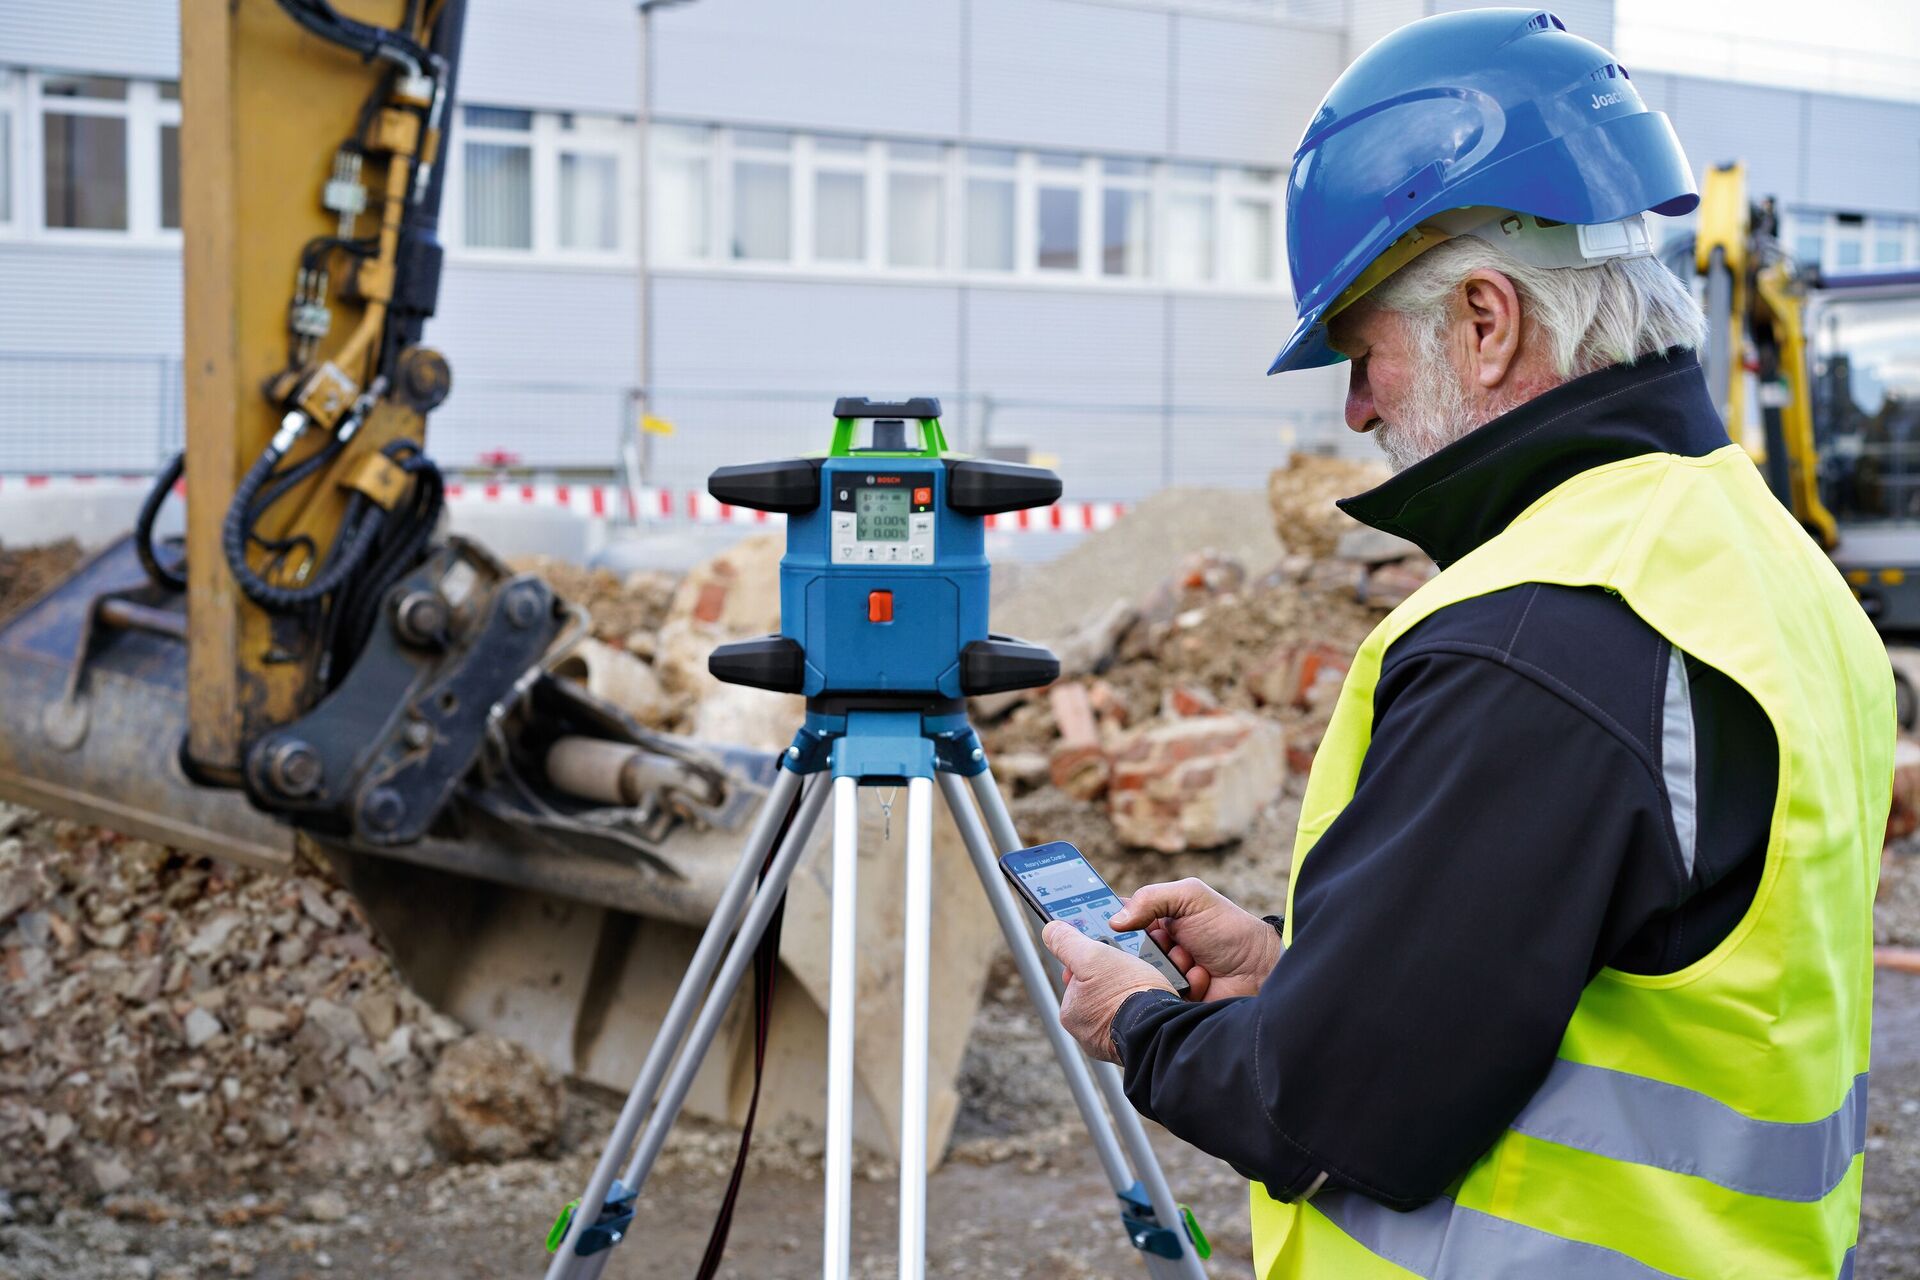 How To Mount A Bosch Rotary Laser Level For Grading With Tractor